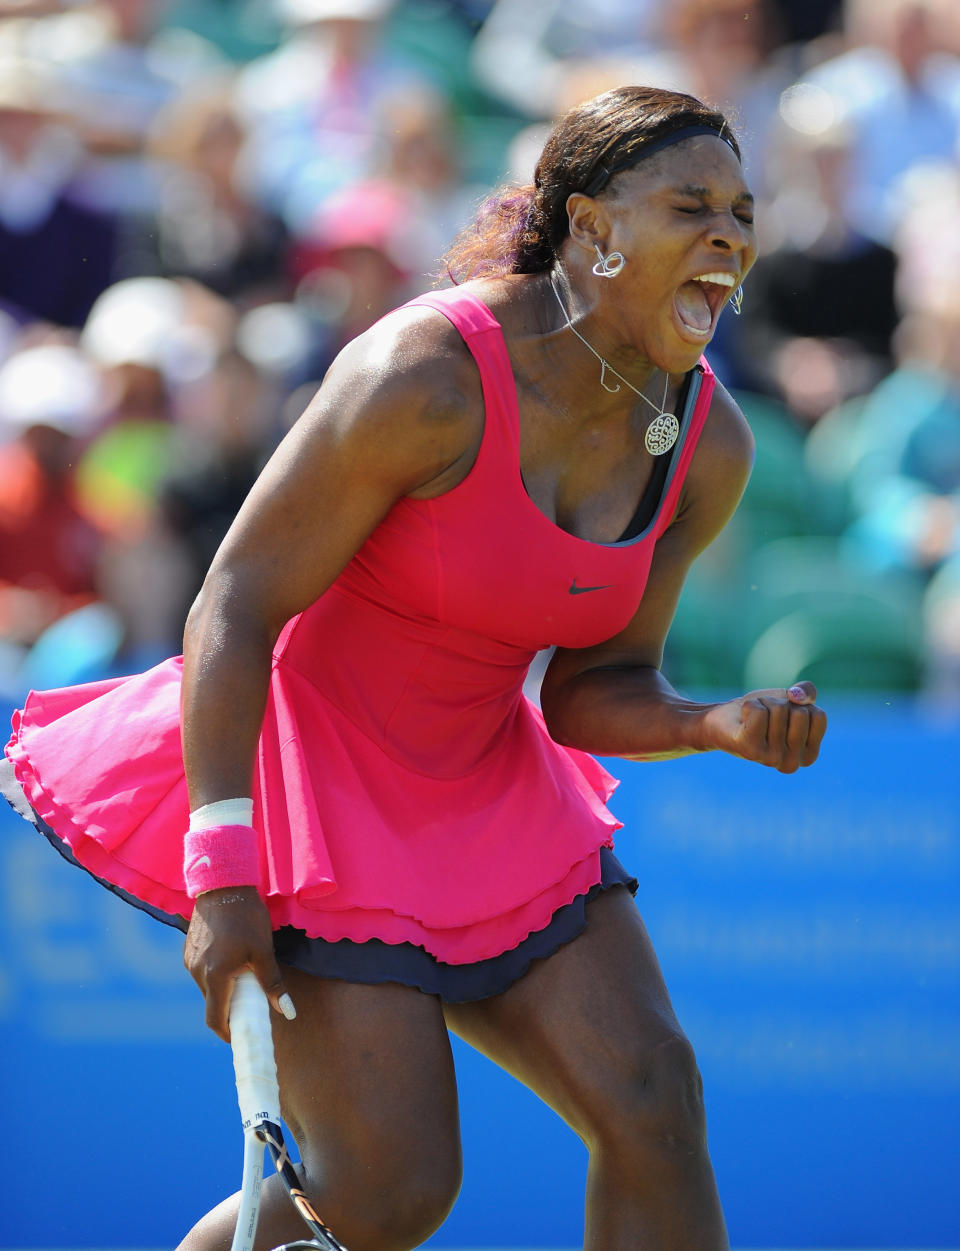 EASTBOURNE, ENGLAND - JUNE 15: Serena Williams of USA in action against Vera Zvonareva of Russia during day five of the AEGON International at Devonshire Park on June 15, 2011 in Eastbourne, England. (Photo by Mike Hewitt/Getty Images)